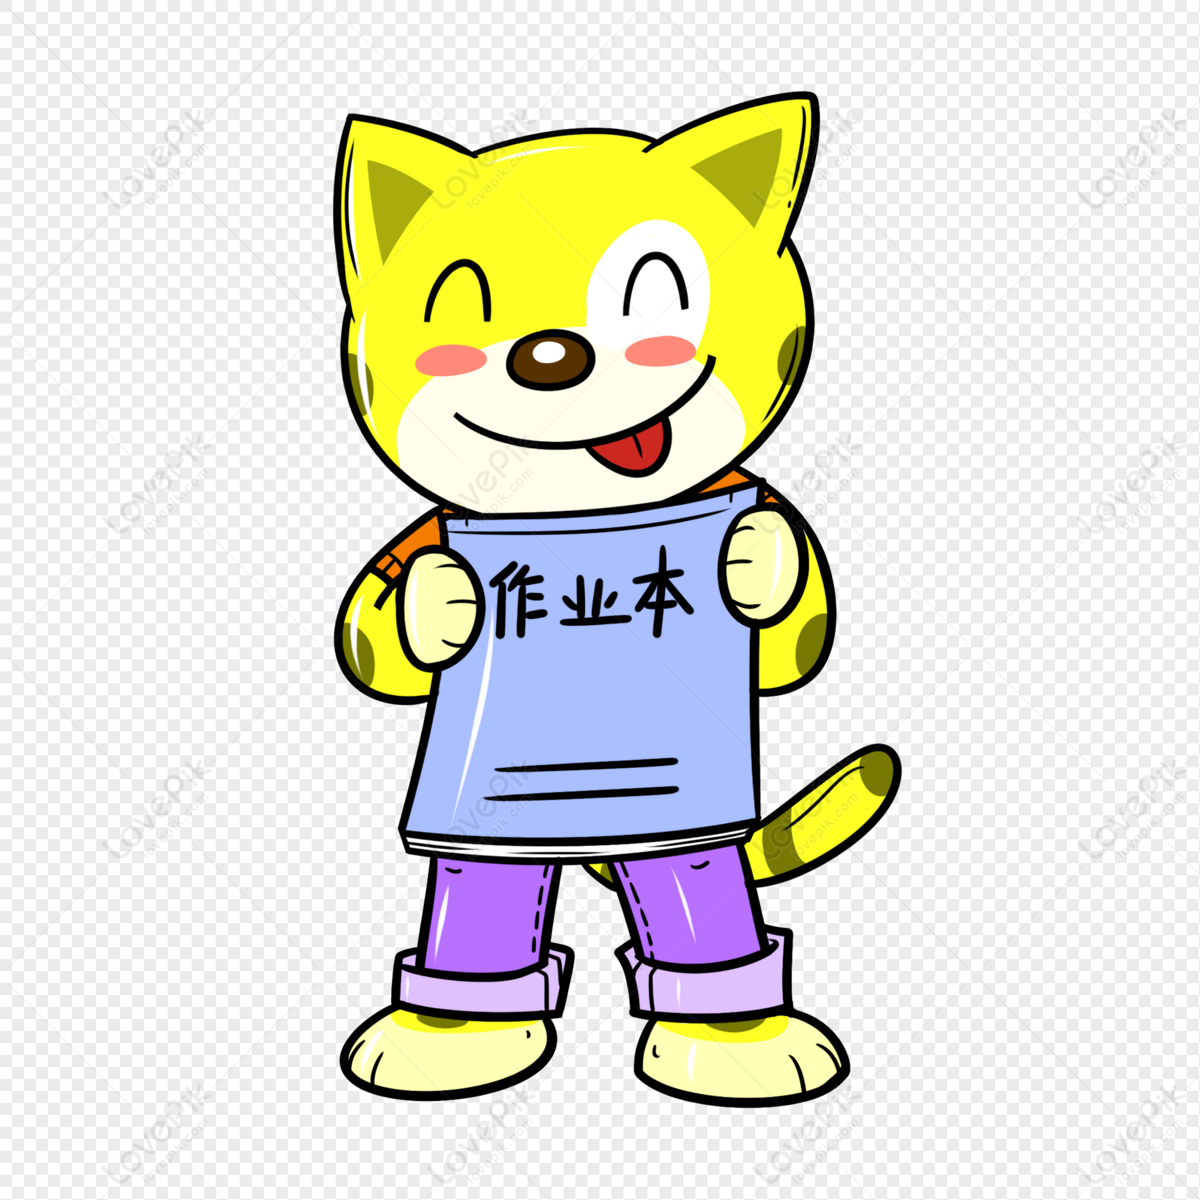 Small yellow cat and homework book, kittens, small book, and homework png image